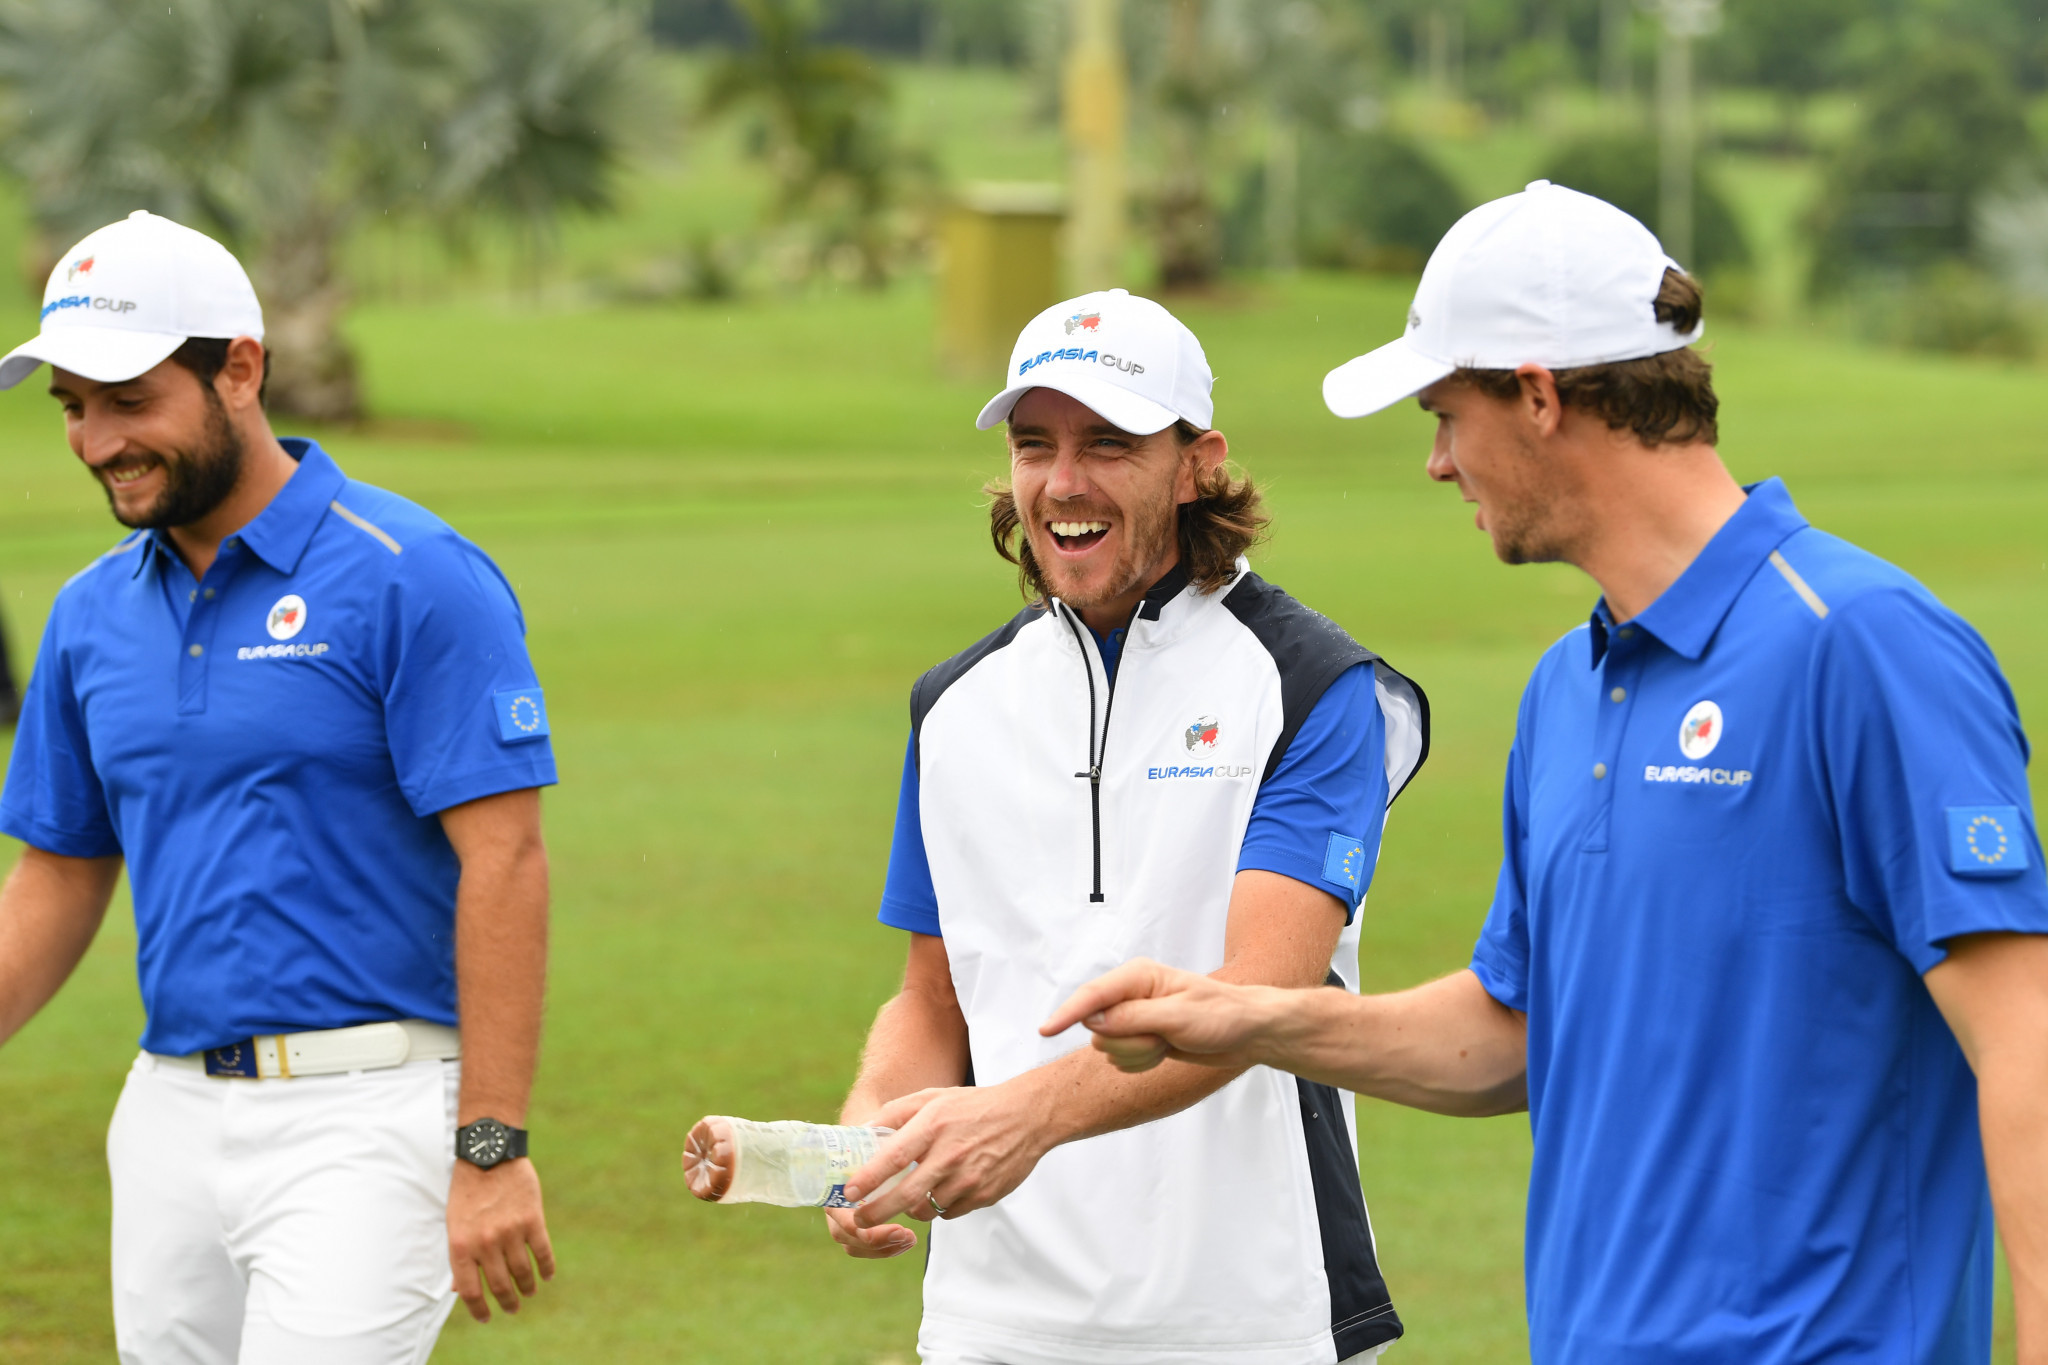 Tommy Fleetwood, of Europe, laughs with Alexander Levy and Thomas Pieters during the fourballs matches on day one of the 2018 EurAsia Cup in Kuala Lumpur, Malaysia ©Getty Images